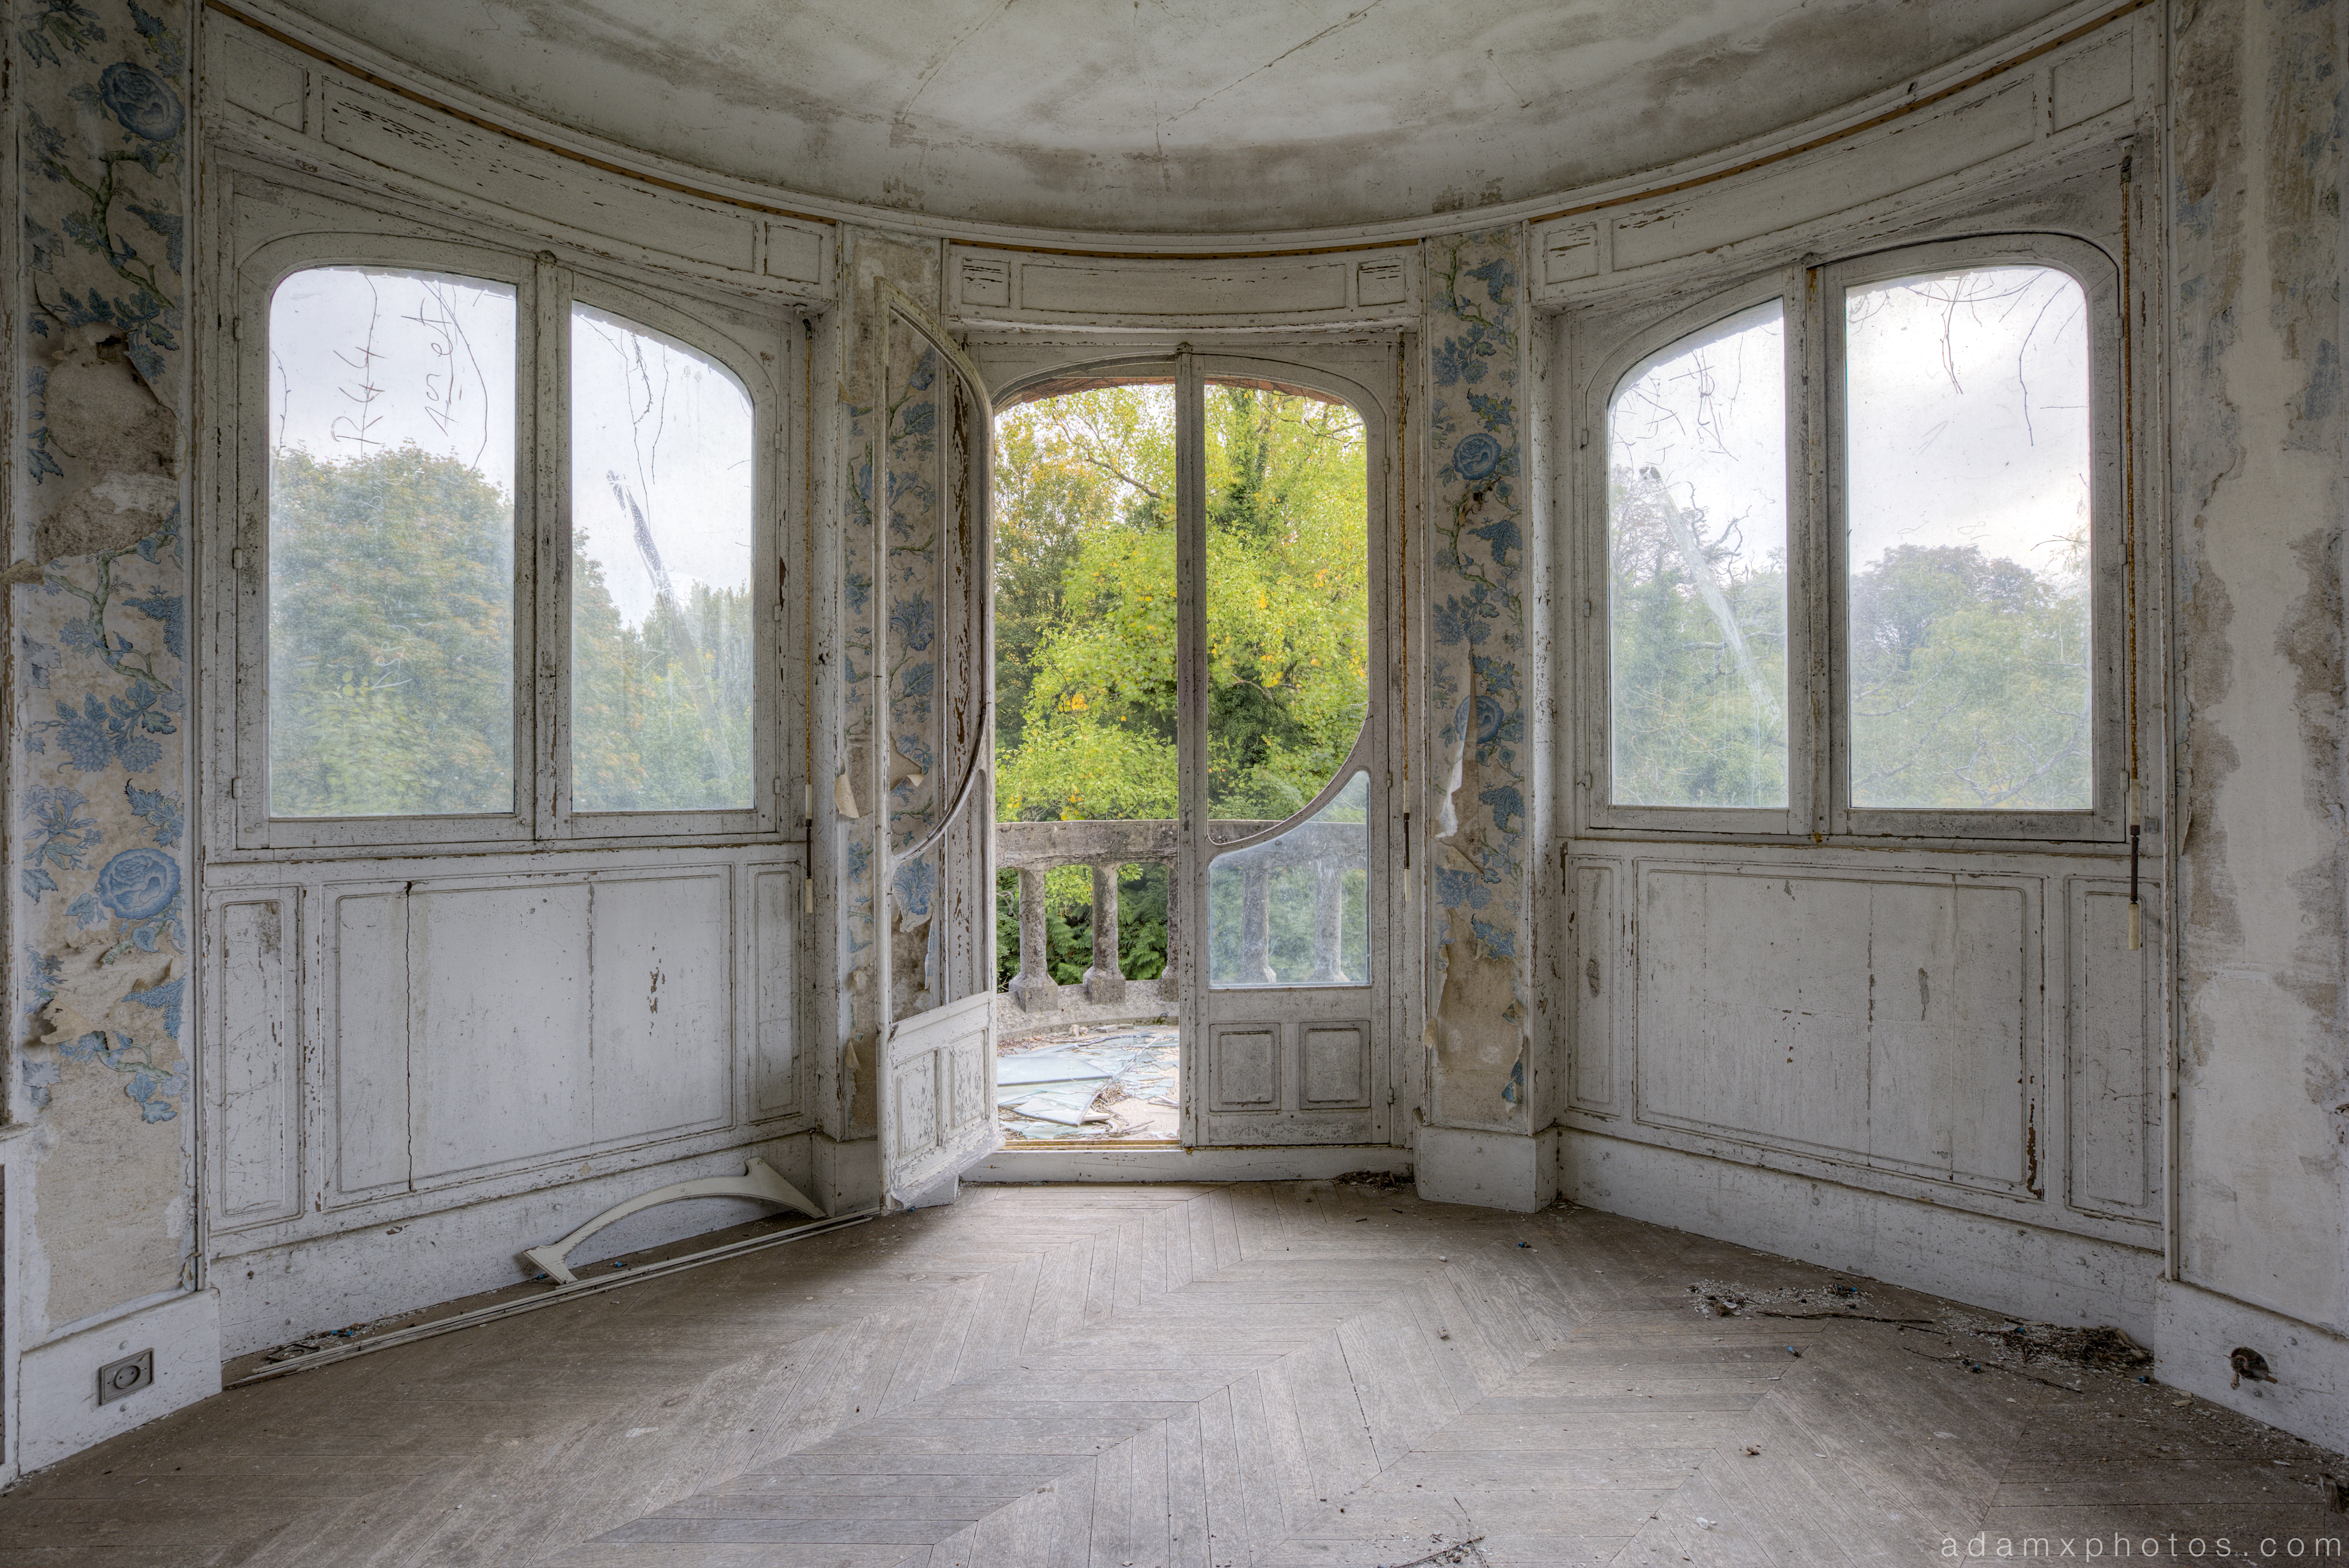 Wallpaper room windows Chateau Colimacon Spiral France Urbex Adam X Urban Exploration 2015 Abandoned decay lost forgotten derelict